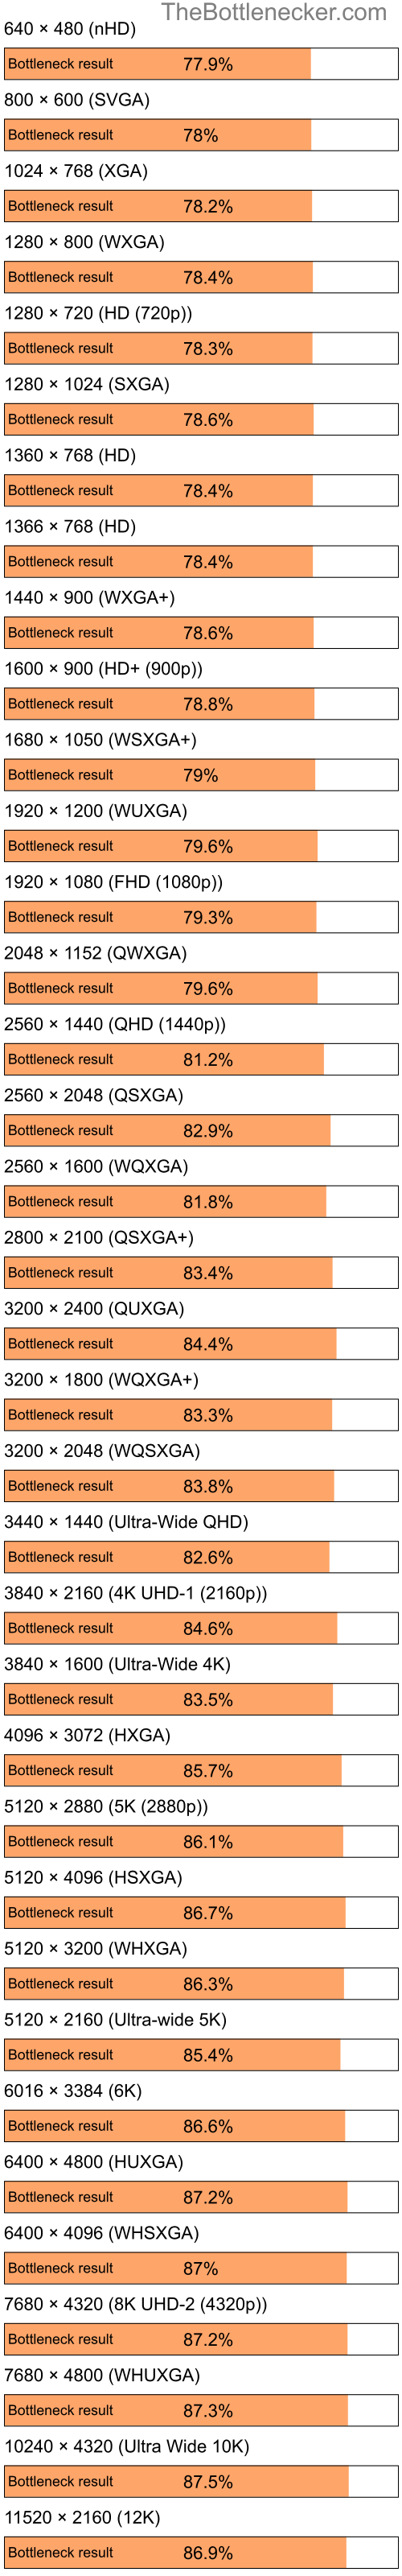 Bottleneck results by resolution for Intel Atom Z520 and Intel G33 in Graphic Card Intense Tasks